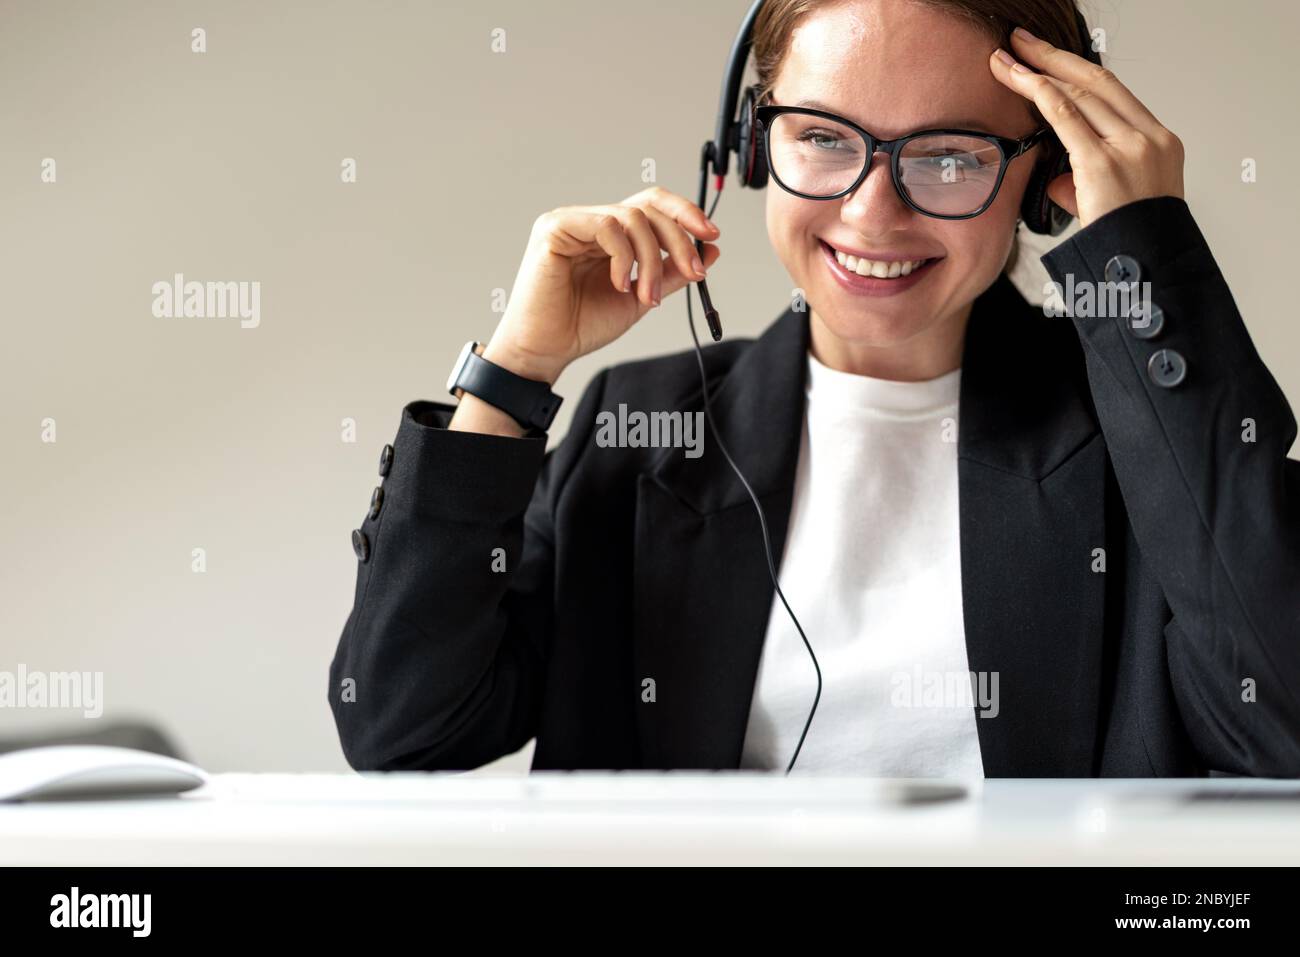 Young woman businesswoman in headset participating in business online meeting and smiling. Stock Photo